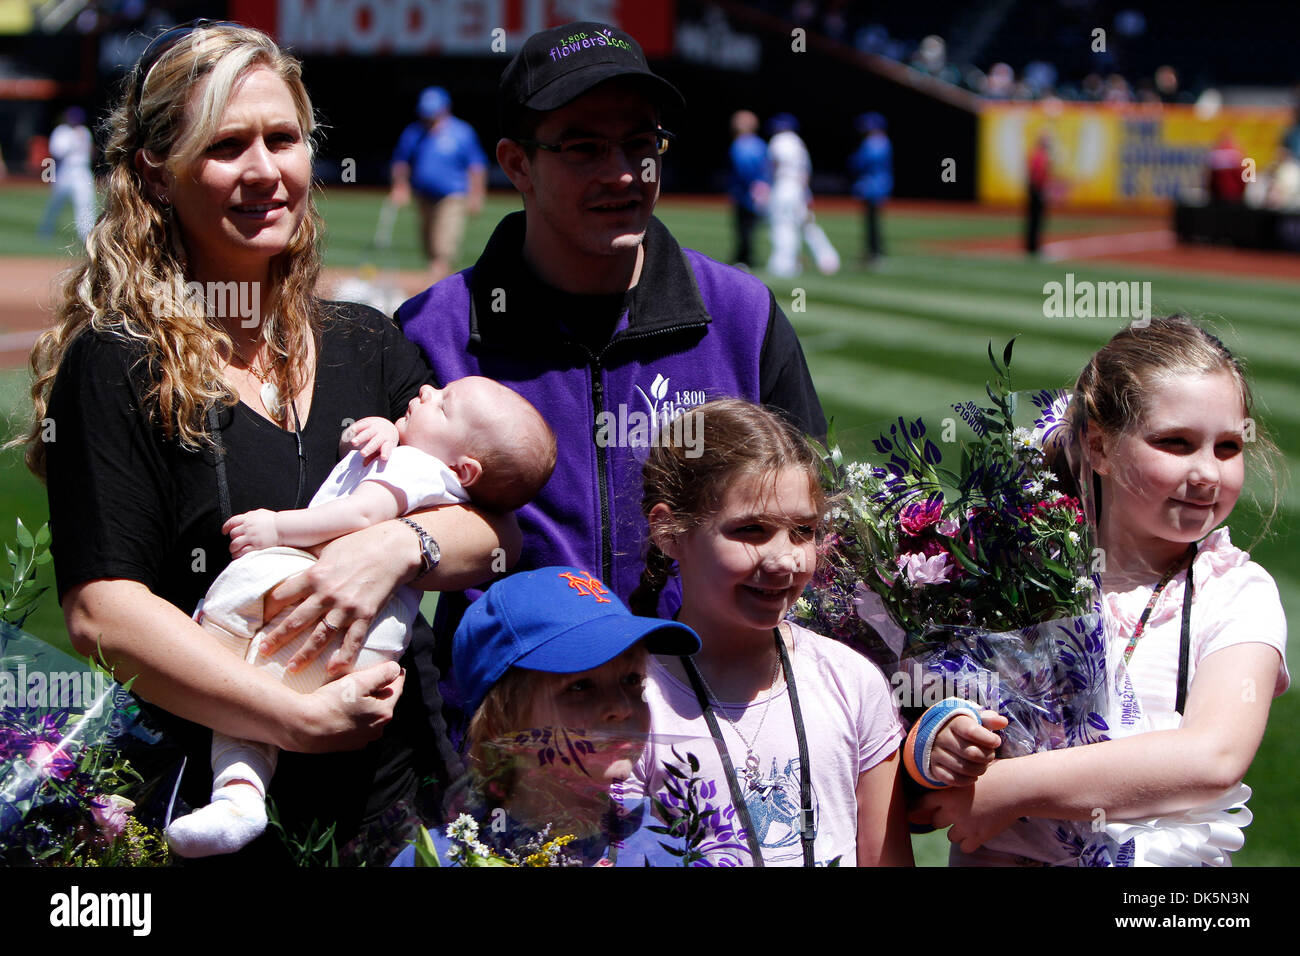 May 8, 2011 - Corona, New York, U.S - New York Mets starting pitcher R.A. Dickey's wife, Anne, and family during Mother's Day pregame ceremonies against the Los Angeles Dodgers at Citi Field, Corona, NY. The Los Angeles Dodgers defeated the New York Mets 4-2. (Credit Image: © Debby Wong/Southcreek Global/ZUMAPRESS.com) Stock Photo